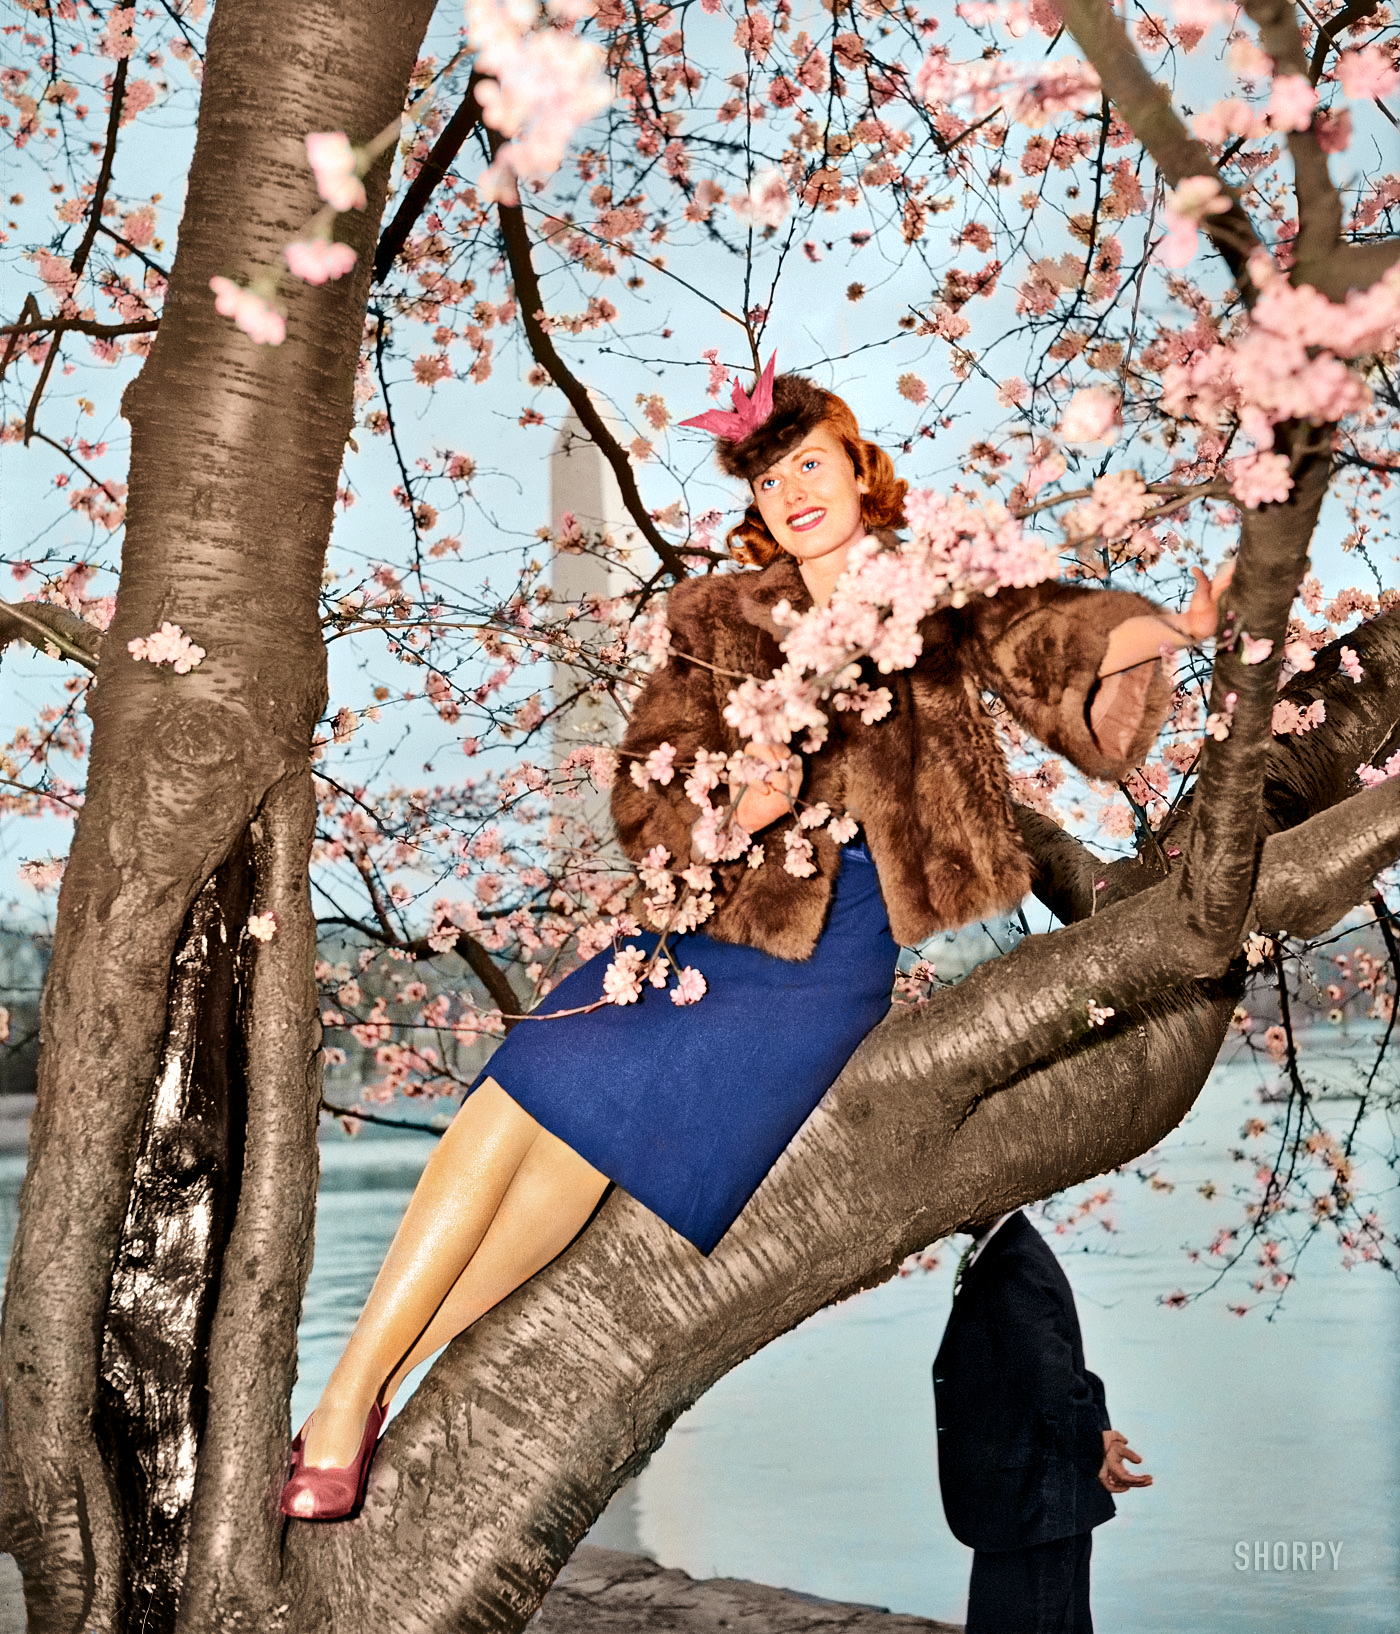 From a Shorpy original; colorized by Michael Catanachapodaca, 2012. View full size.